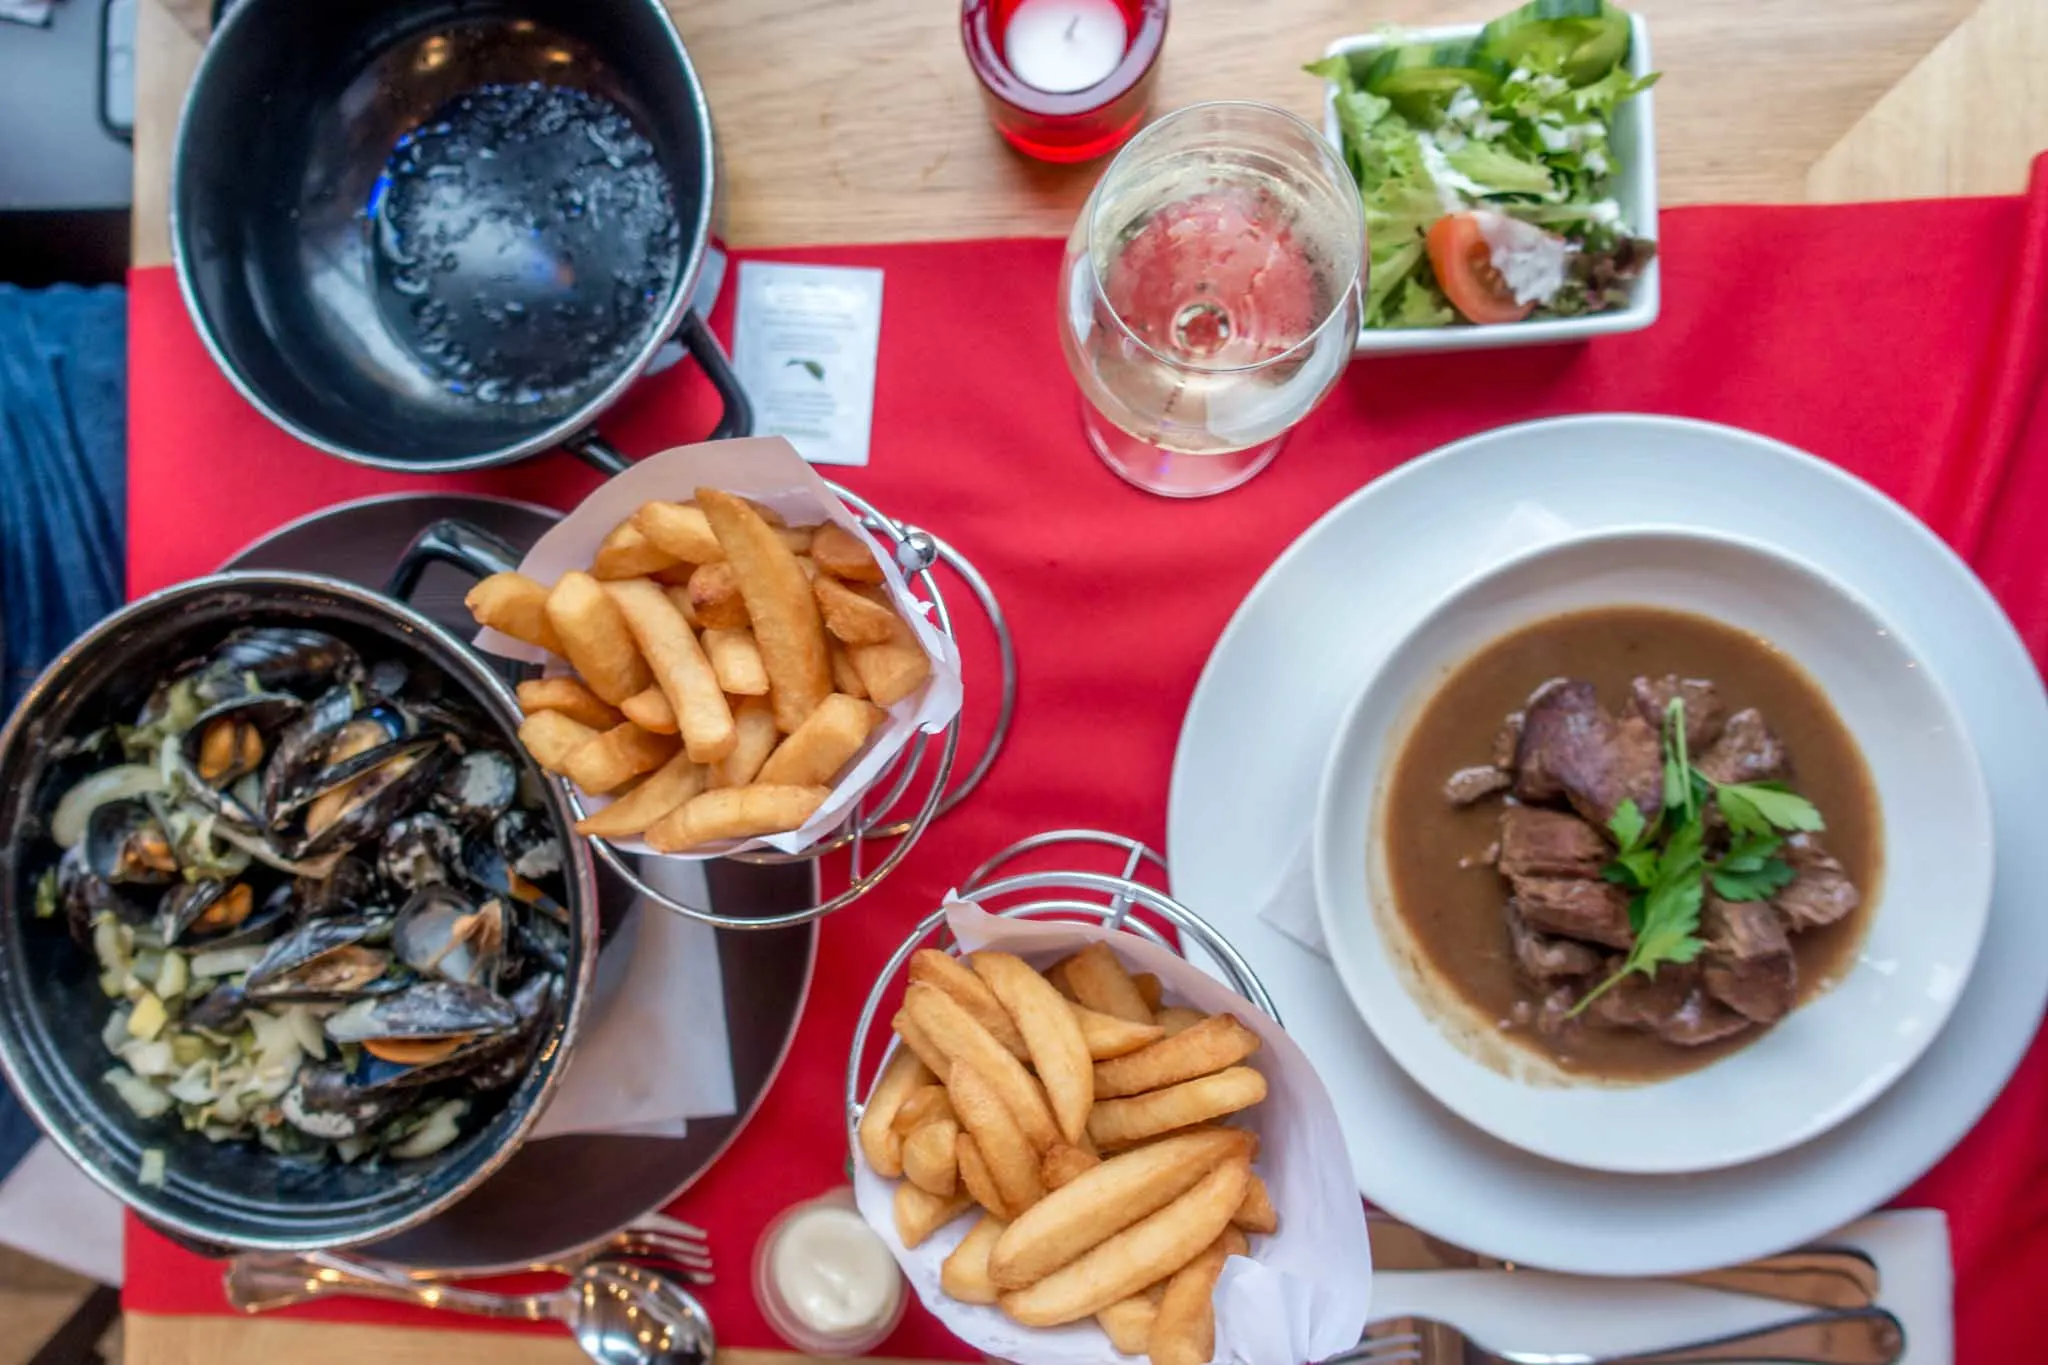 Frites, mussels, and other Belgian food on table